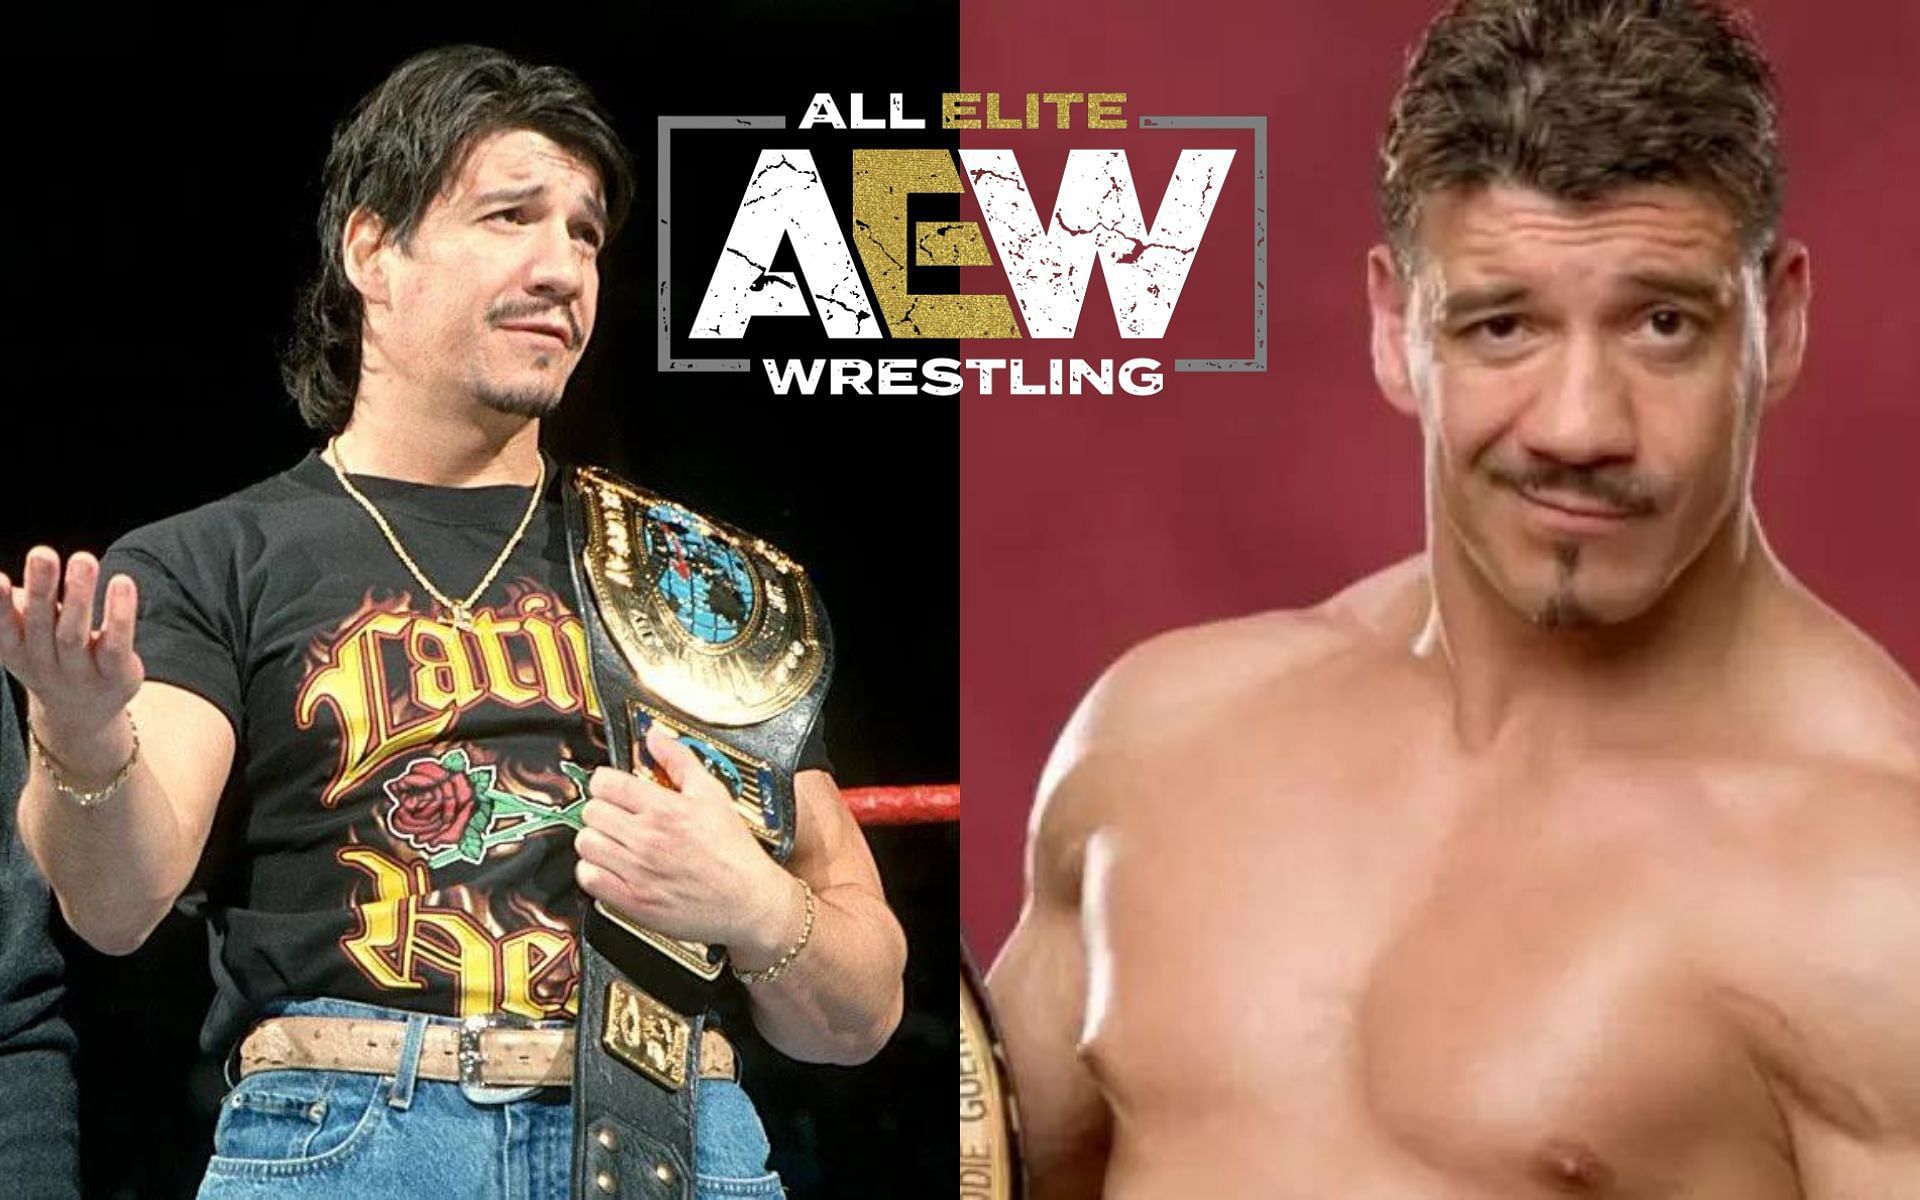 Eddie Guerrero had a massive impact on the cruiserweight division in WWE